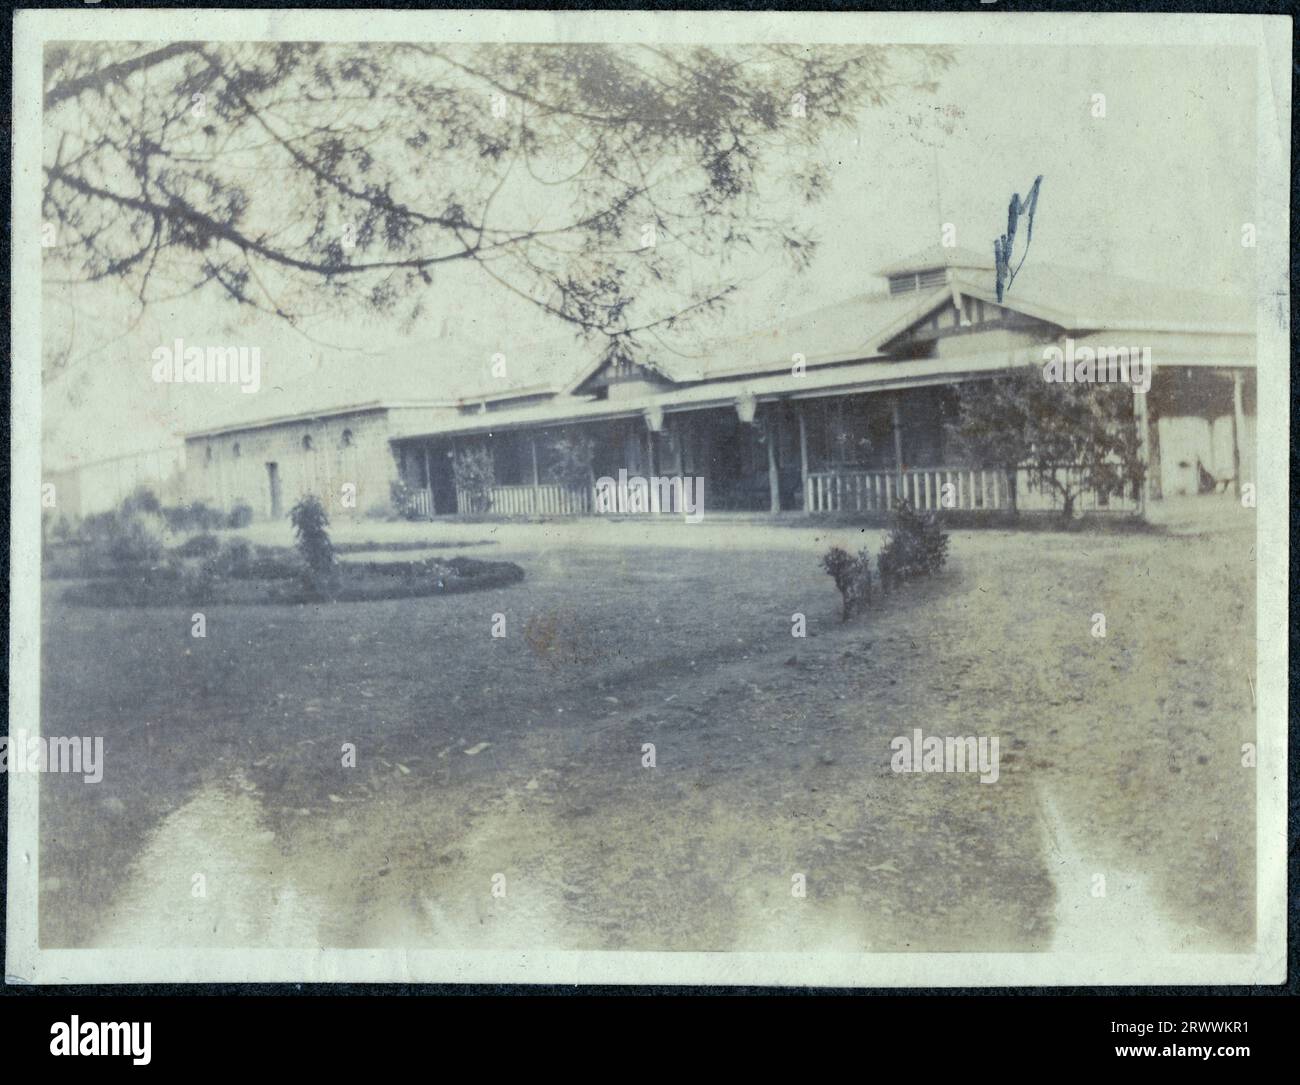 Front elevation of the Nakuru Hotel, a large one storey building with a veranda along the front. There are landscaped gardens in front. The manager of this hotel at one time was William Walter Bungey, Charles Bungey's older brother. Original manuscript caption: Nakuru Hotel [B.E.A.]. Stock Photo